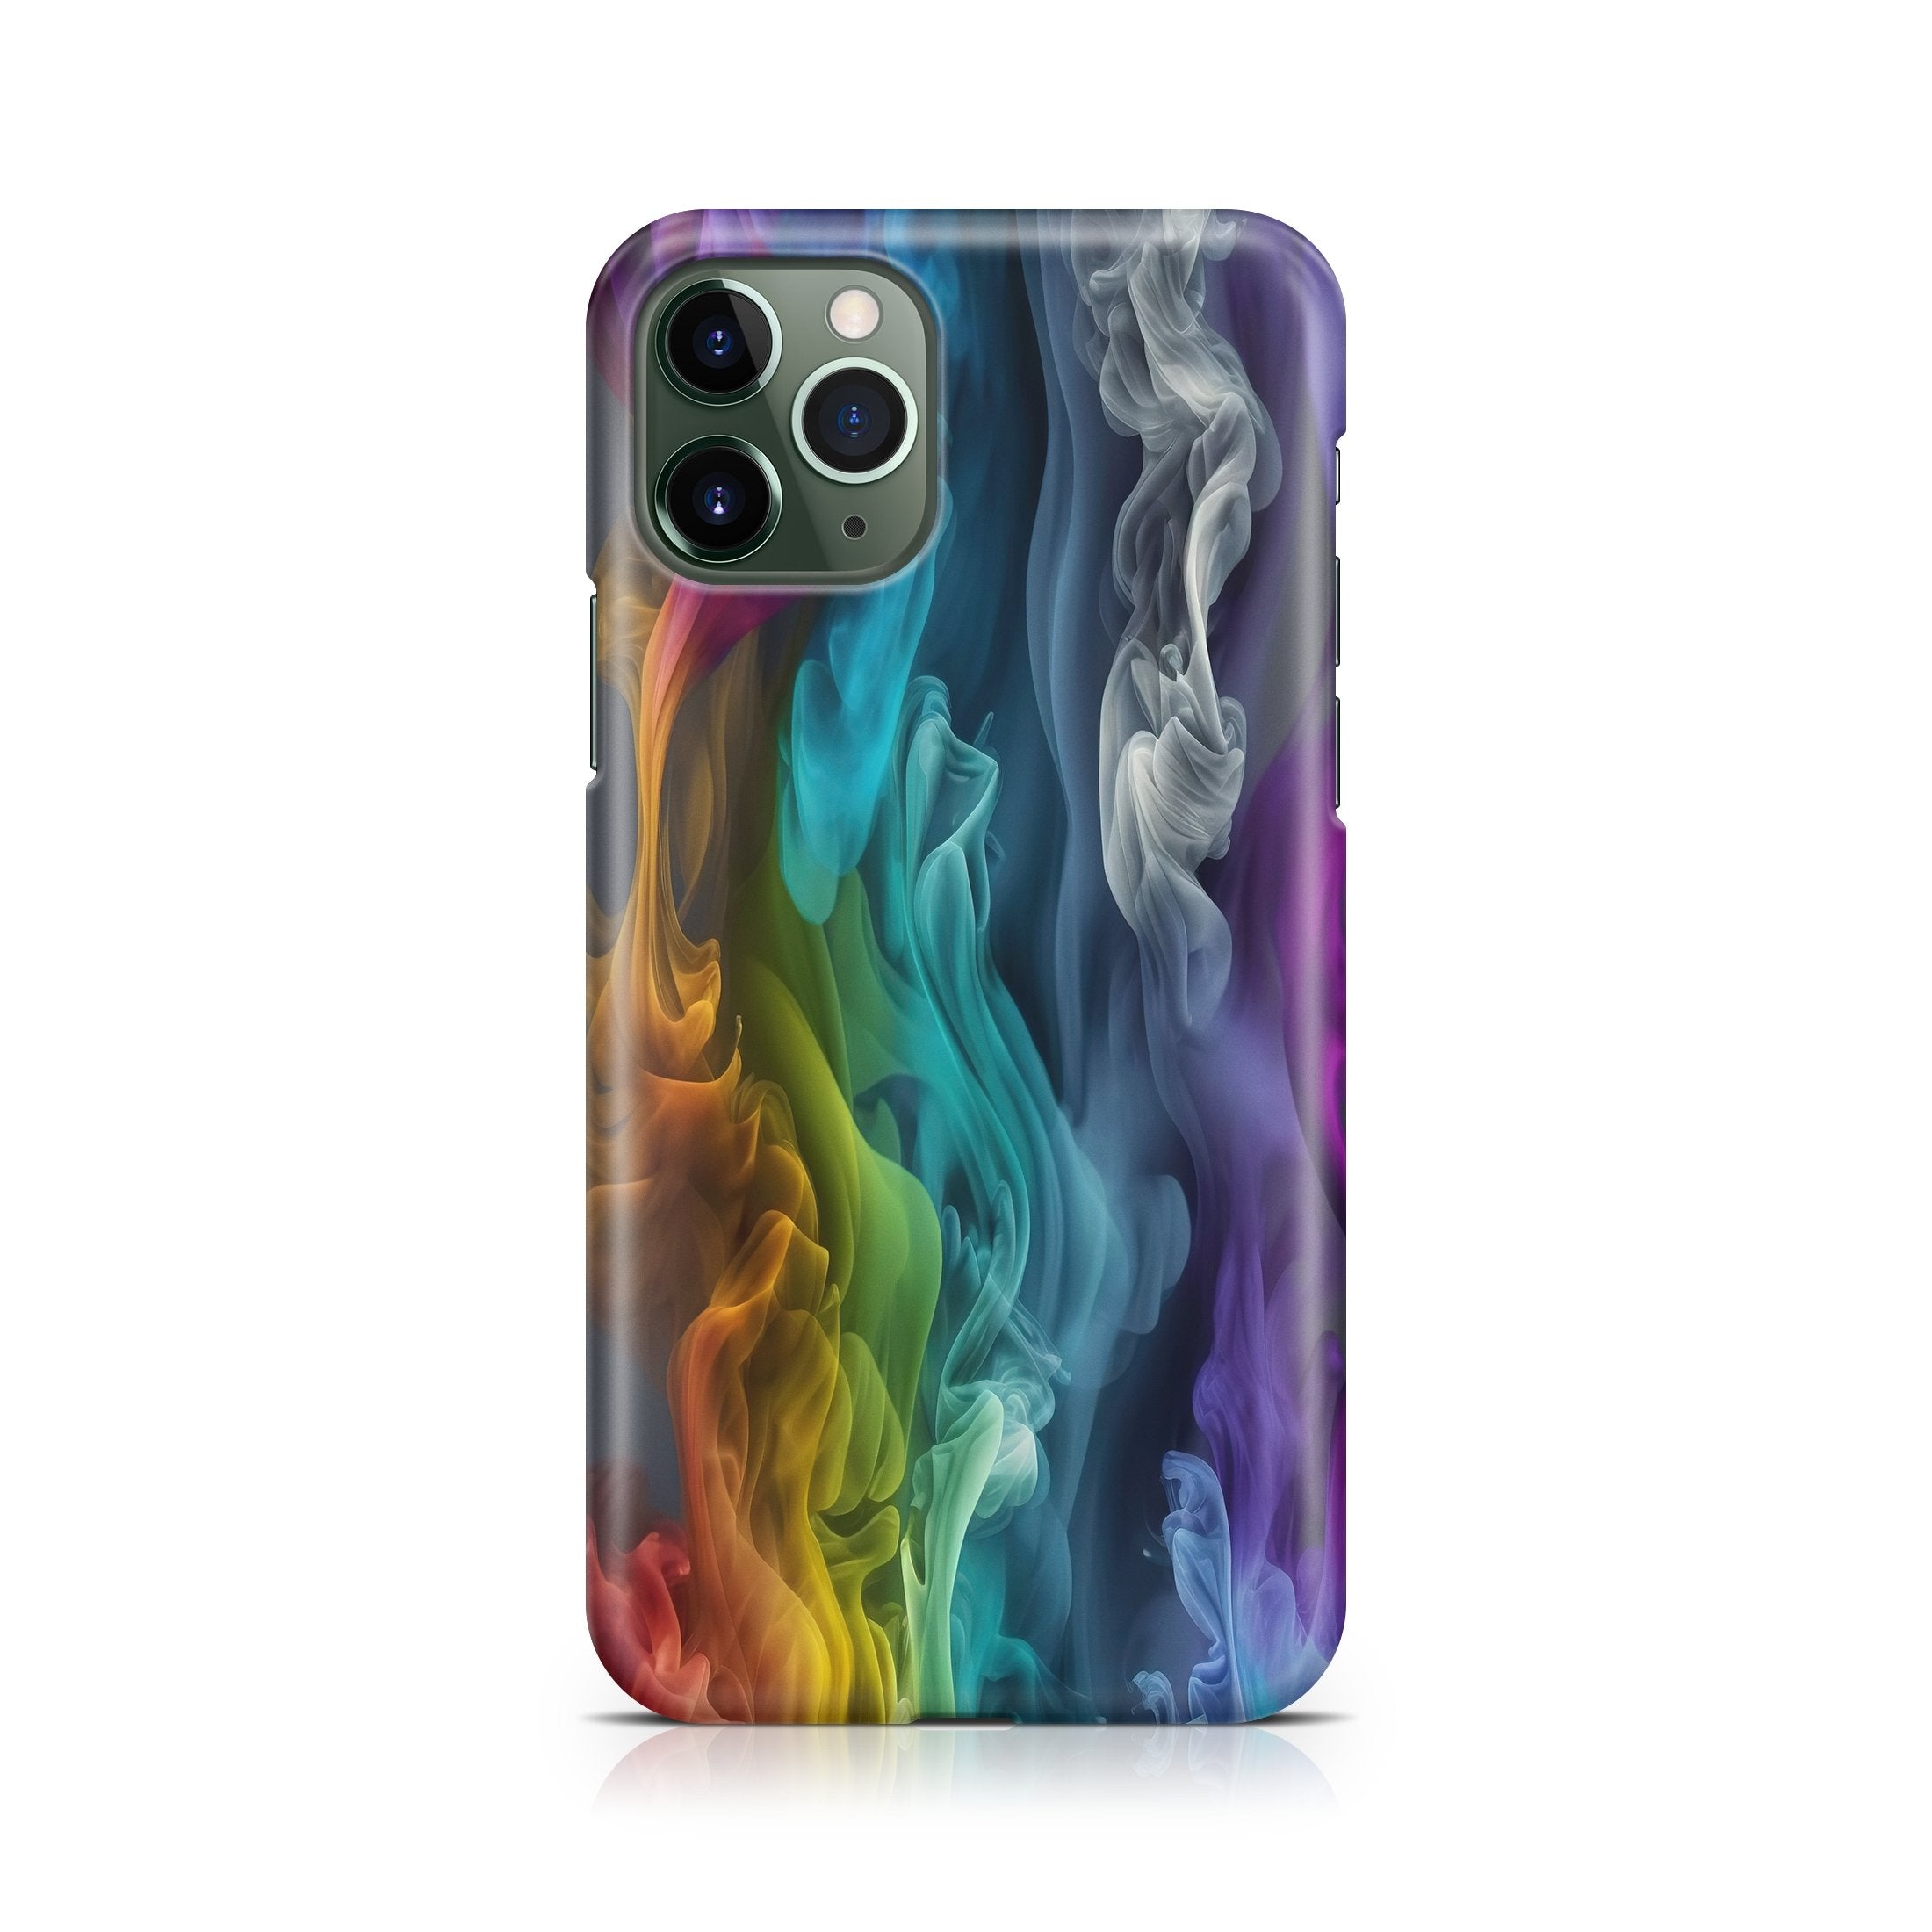 Stream Smoke - iPhone phone case designs by CaseSwagger